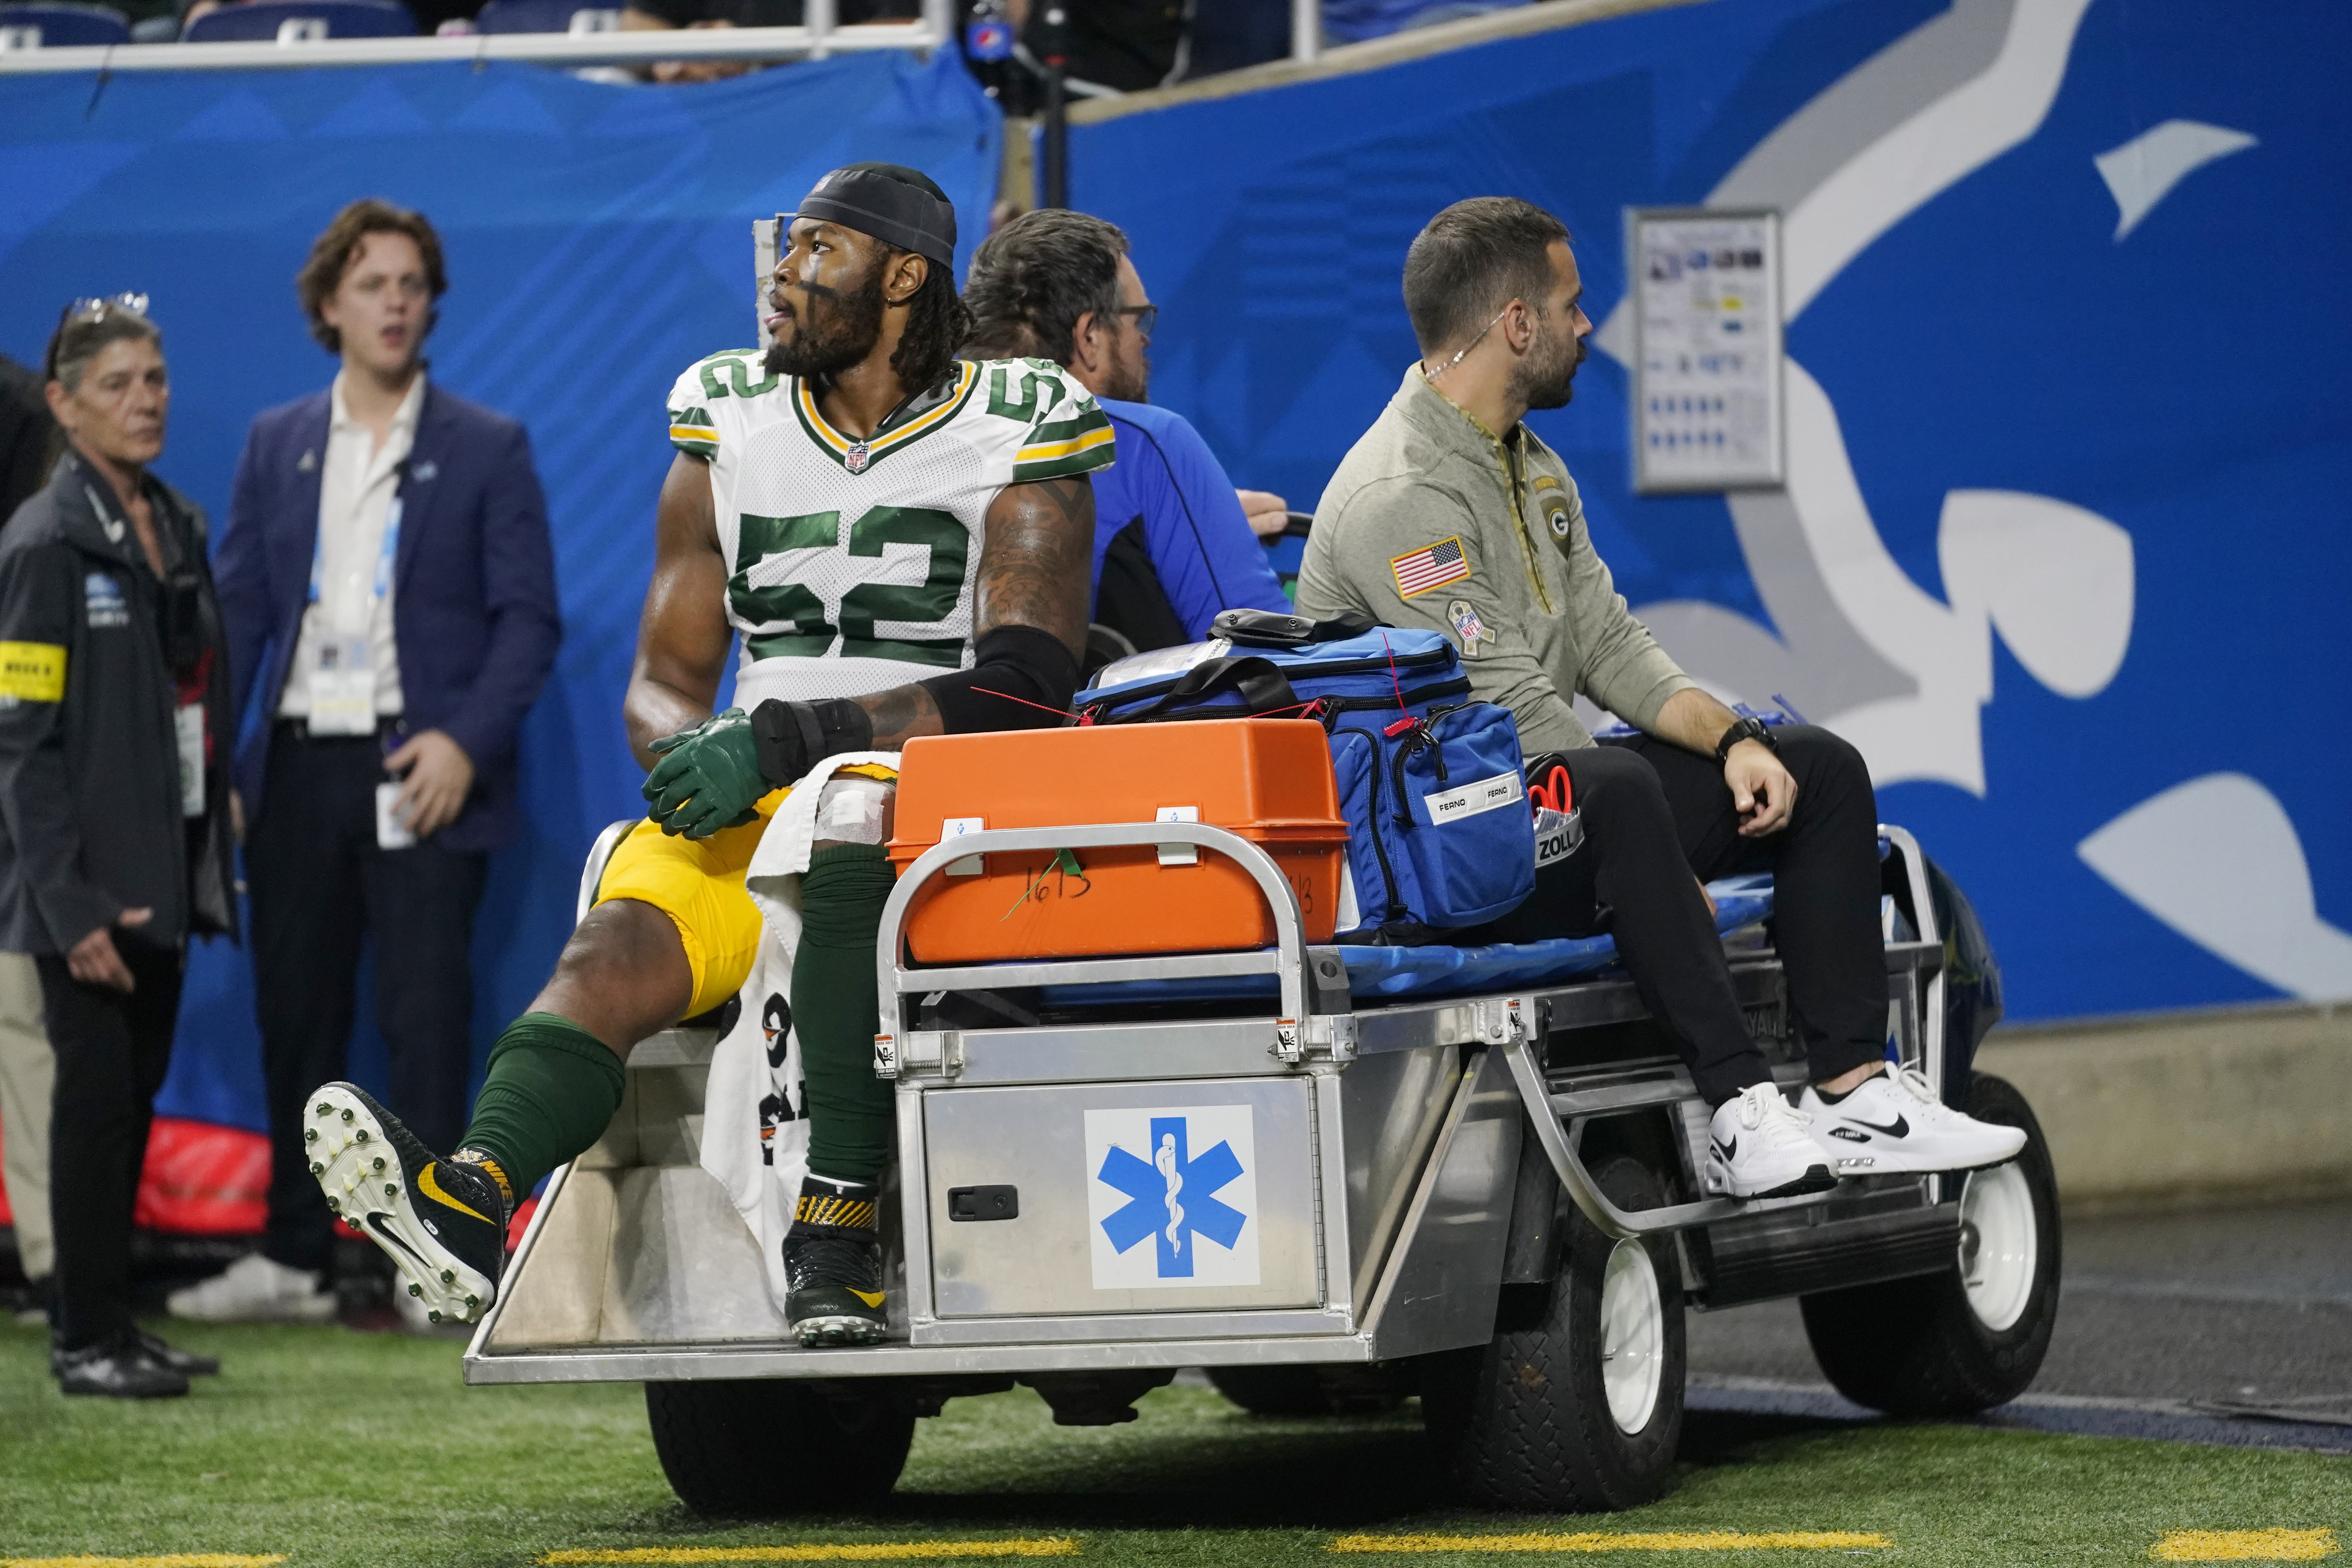 Packers lose in turnover-ridden performance in Detroit 15-9